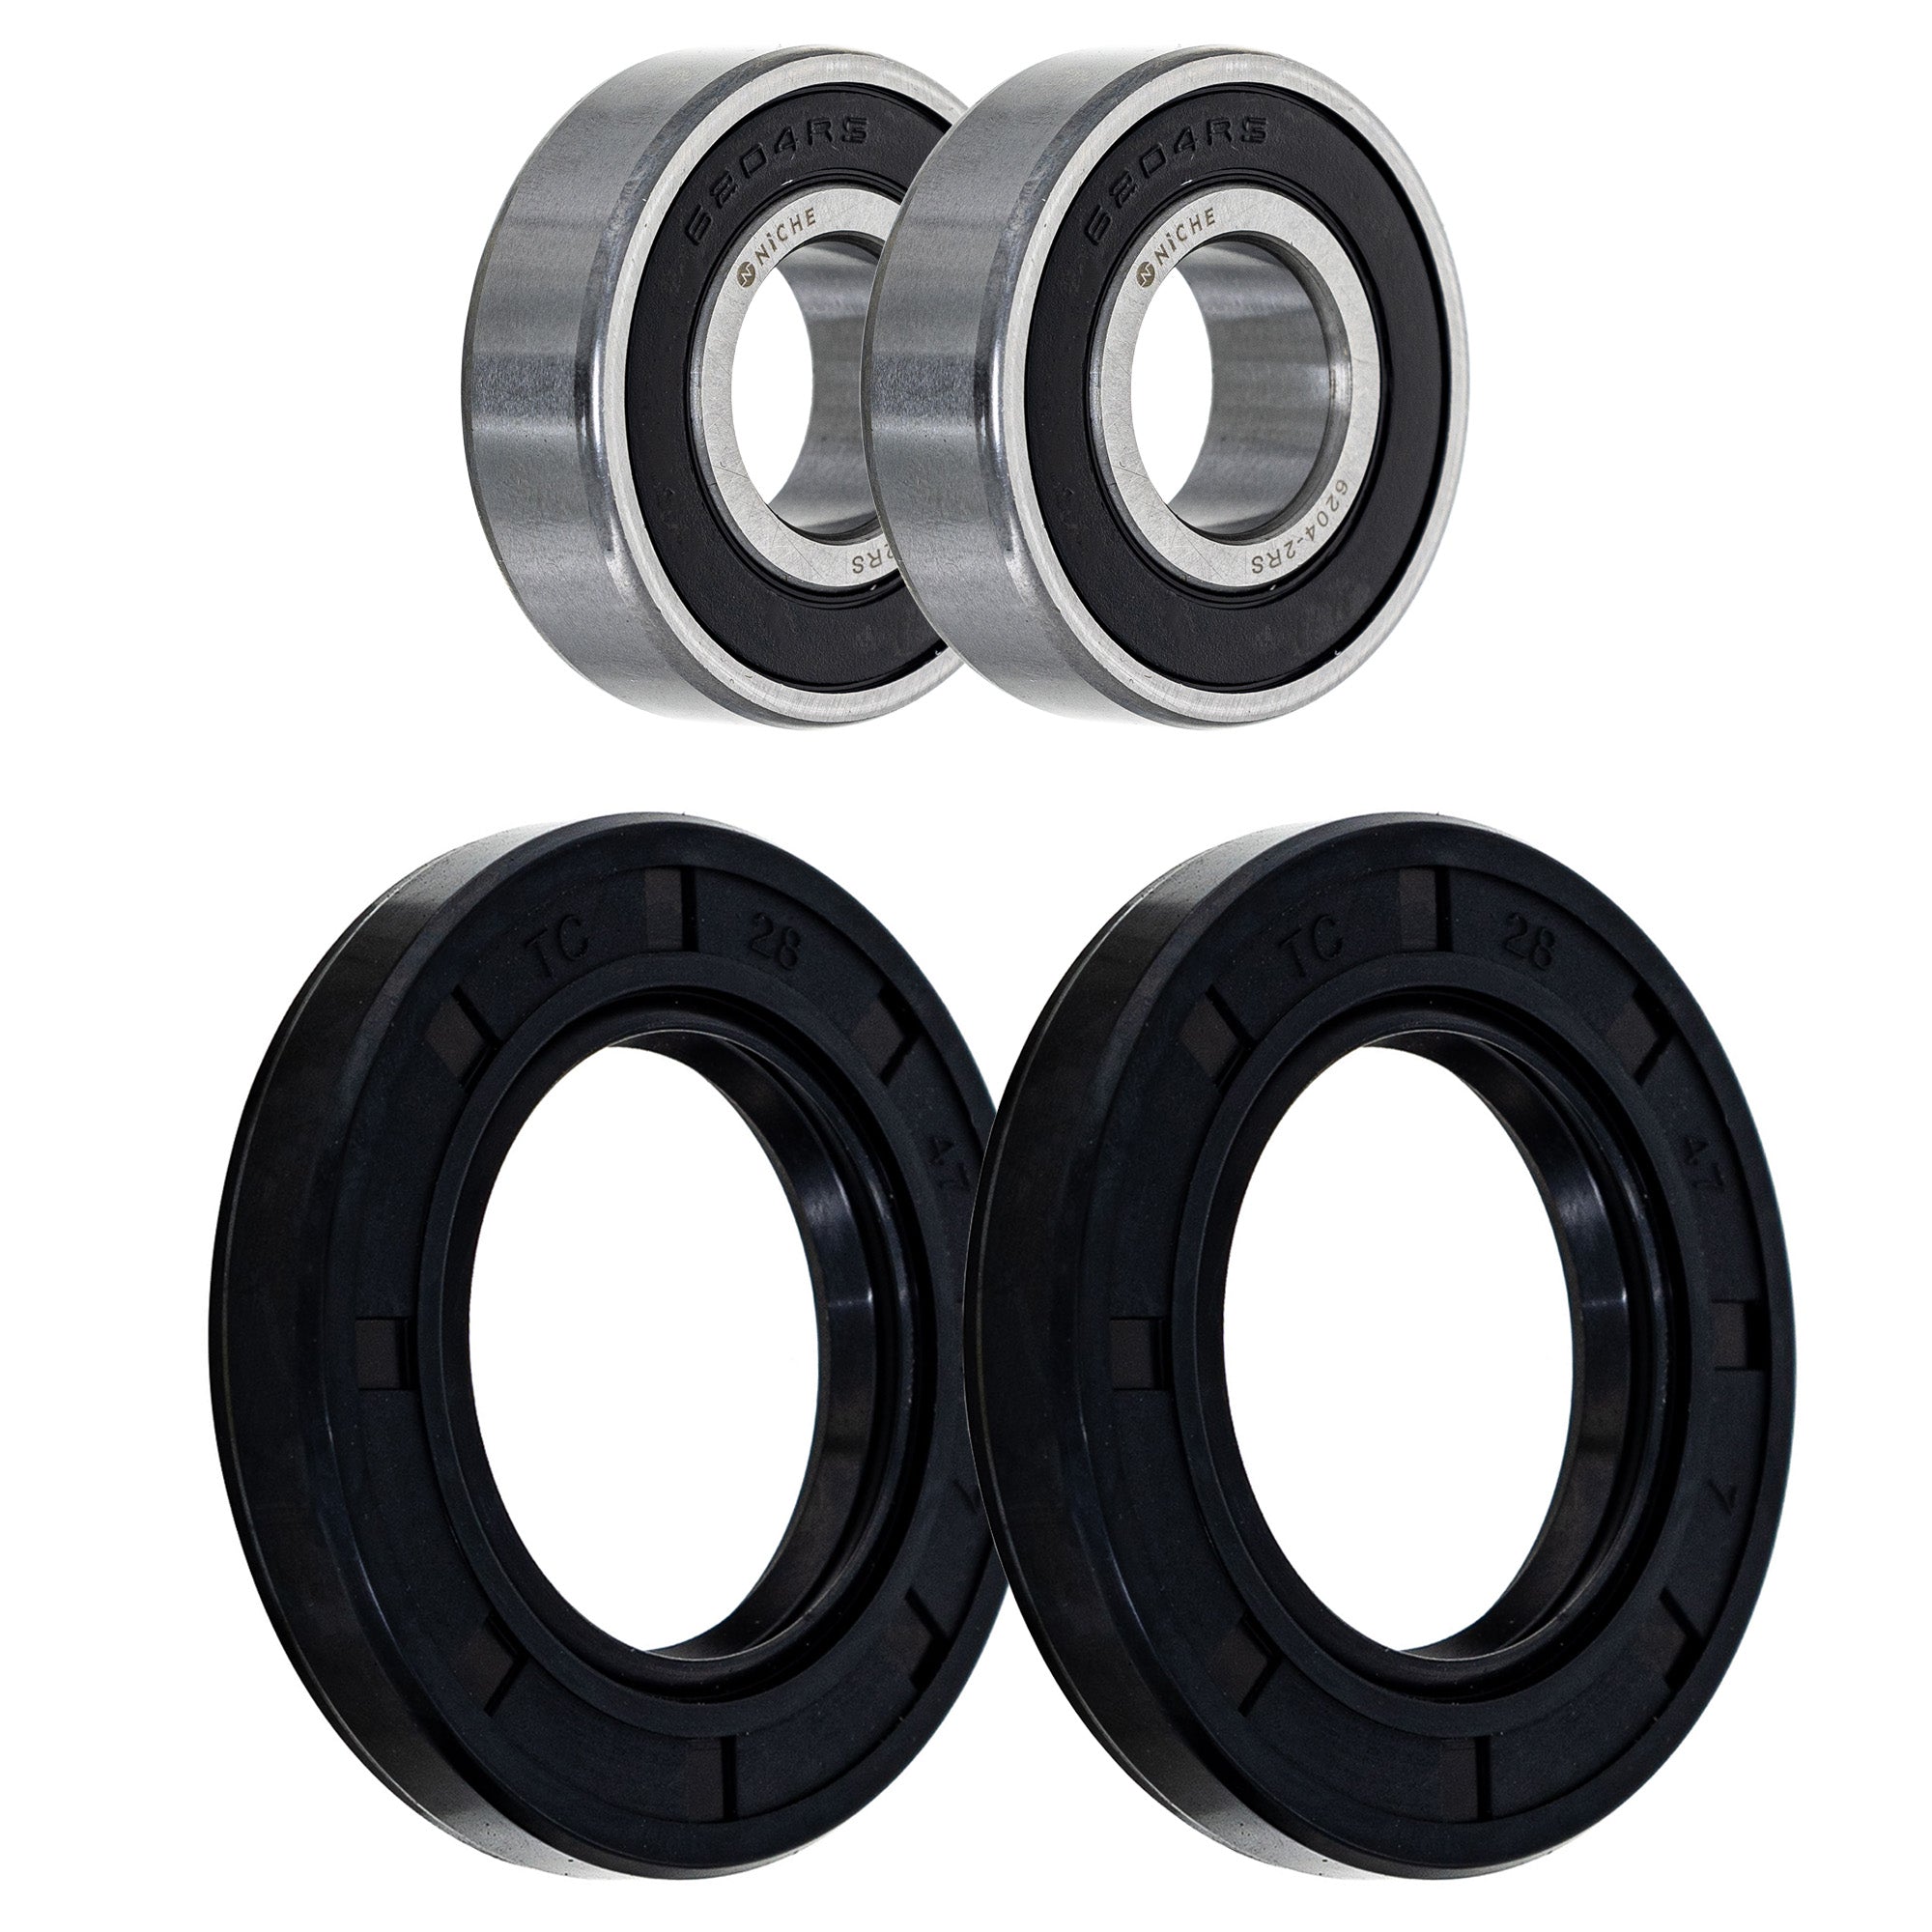 Wheel Bearing Seal Kit for zOTHER Ref No Vstrom Touring RF900R NC750X NICHE MK1009156